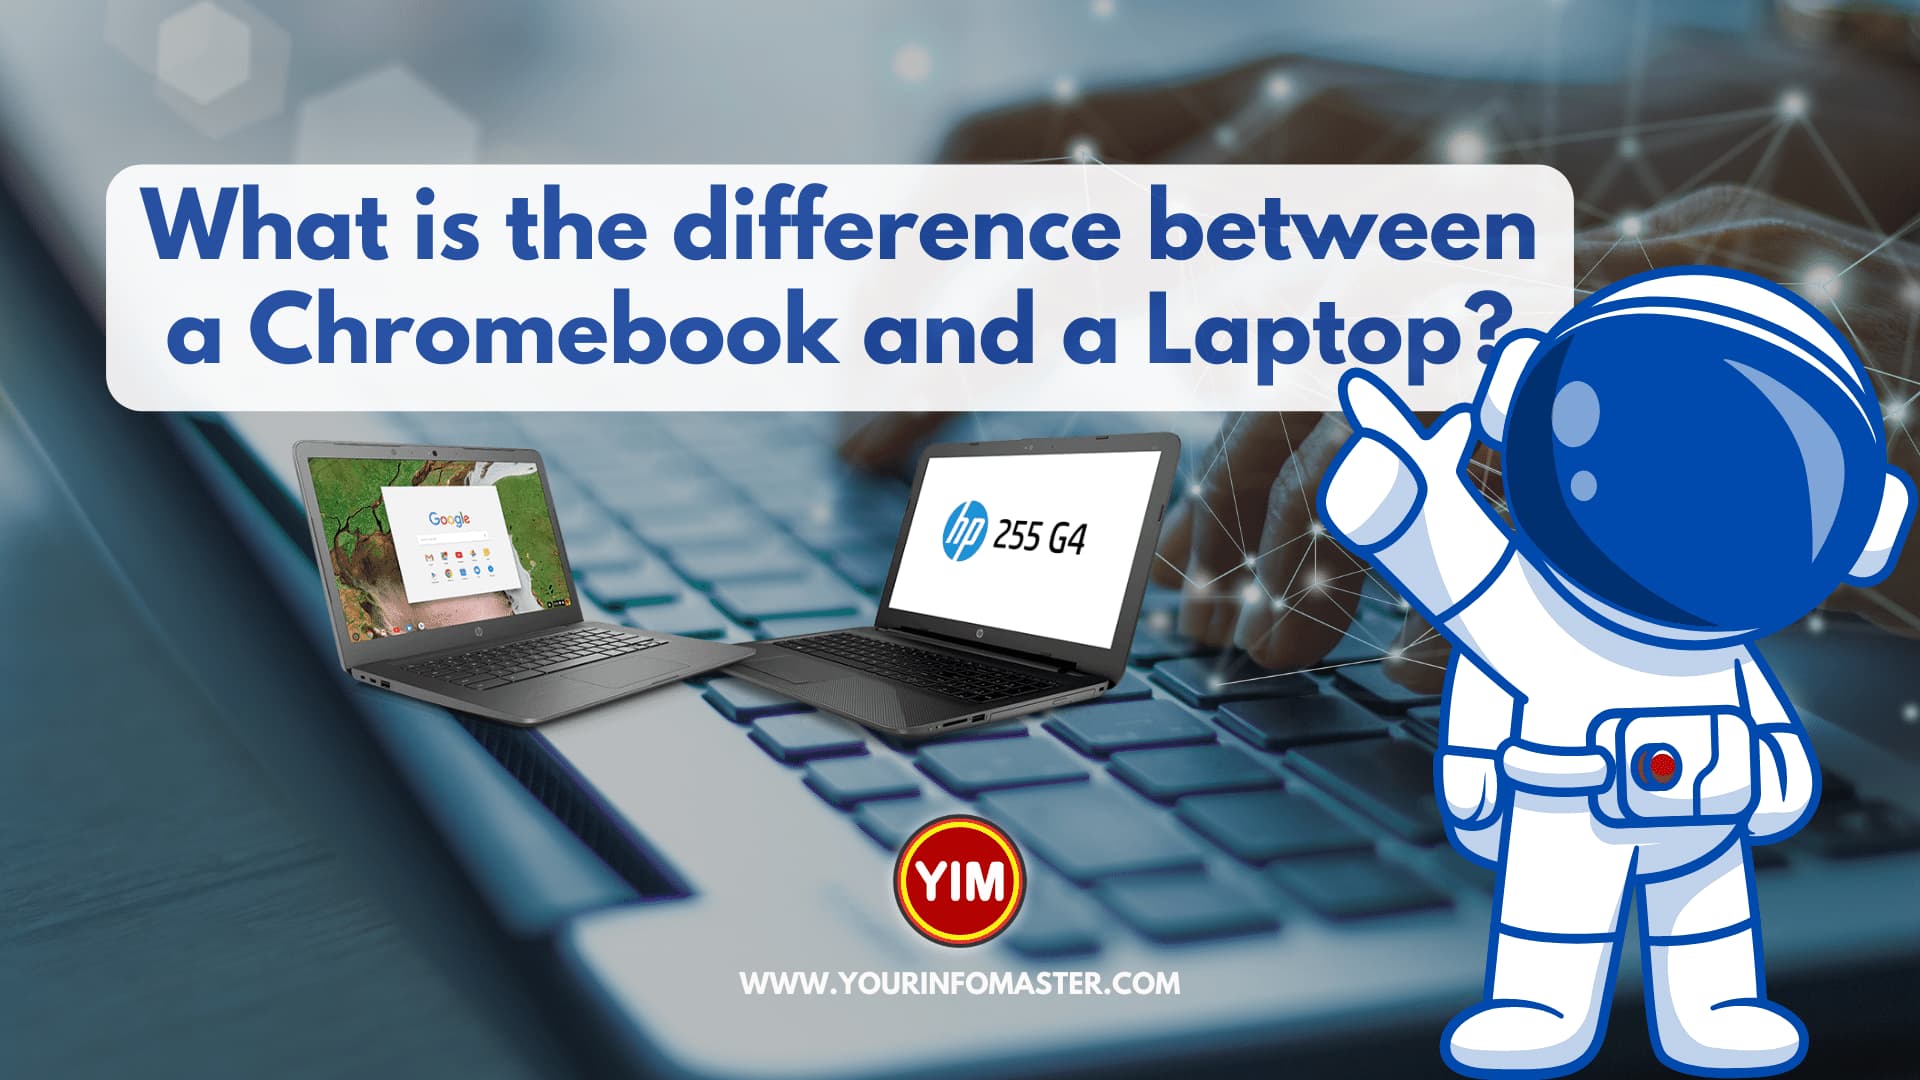 What is the difference between a Chromebook and a Laptop